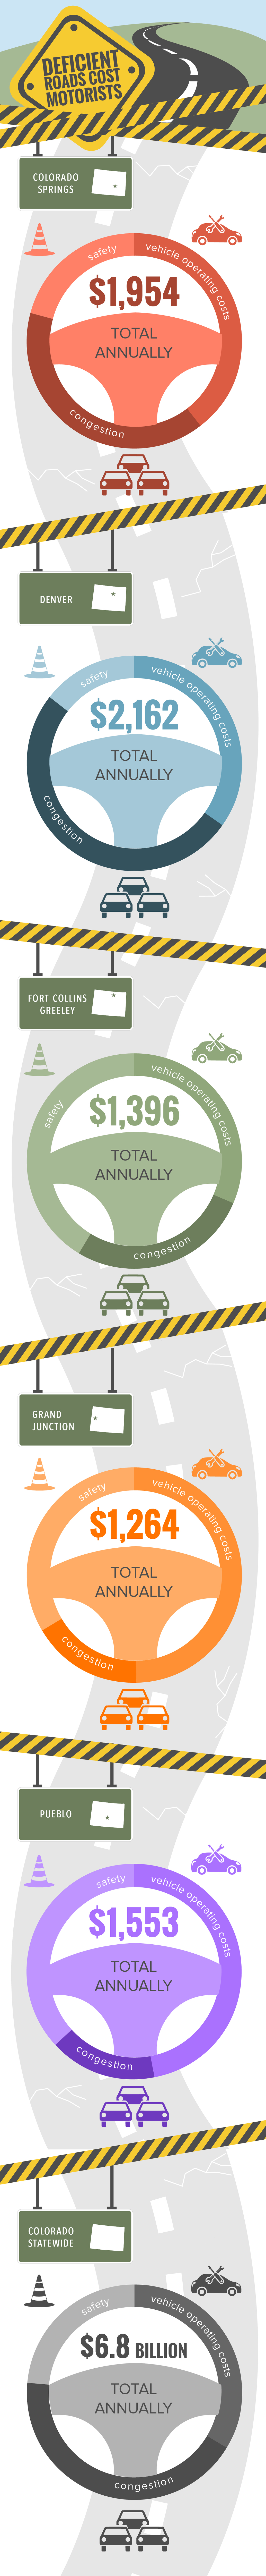 Colorado Deficient Roads Infographic By Locality